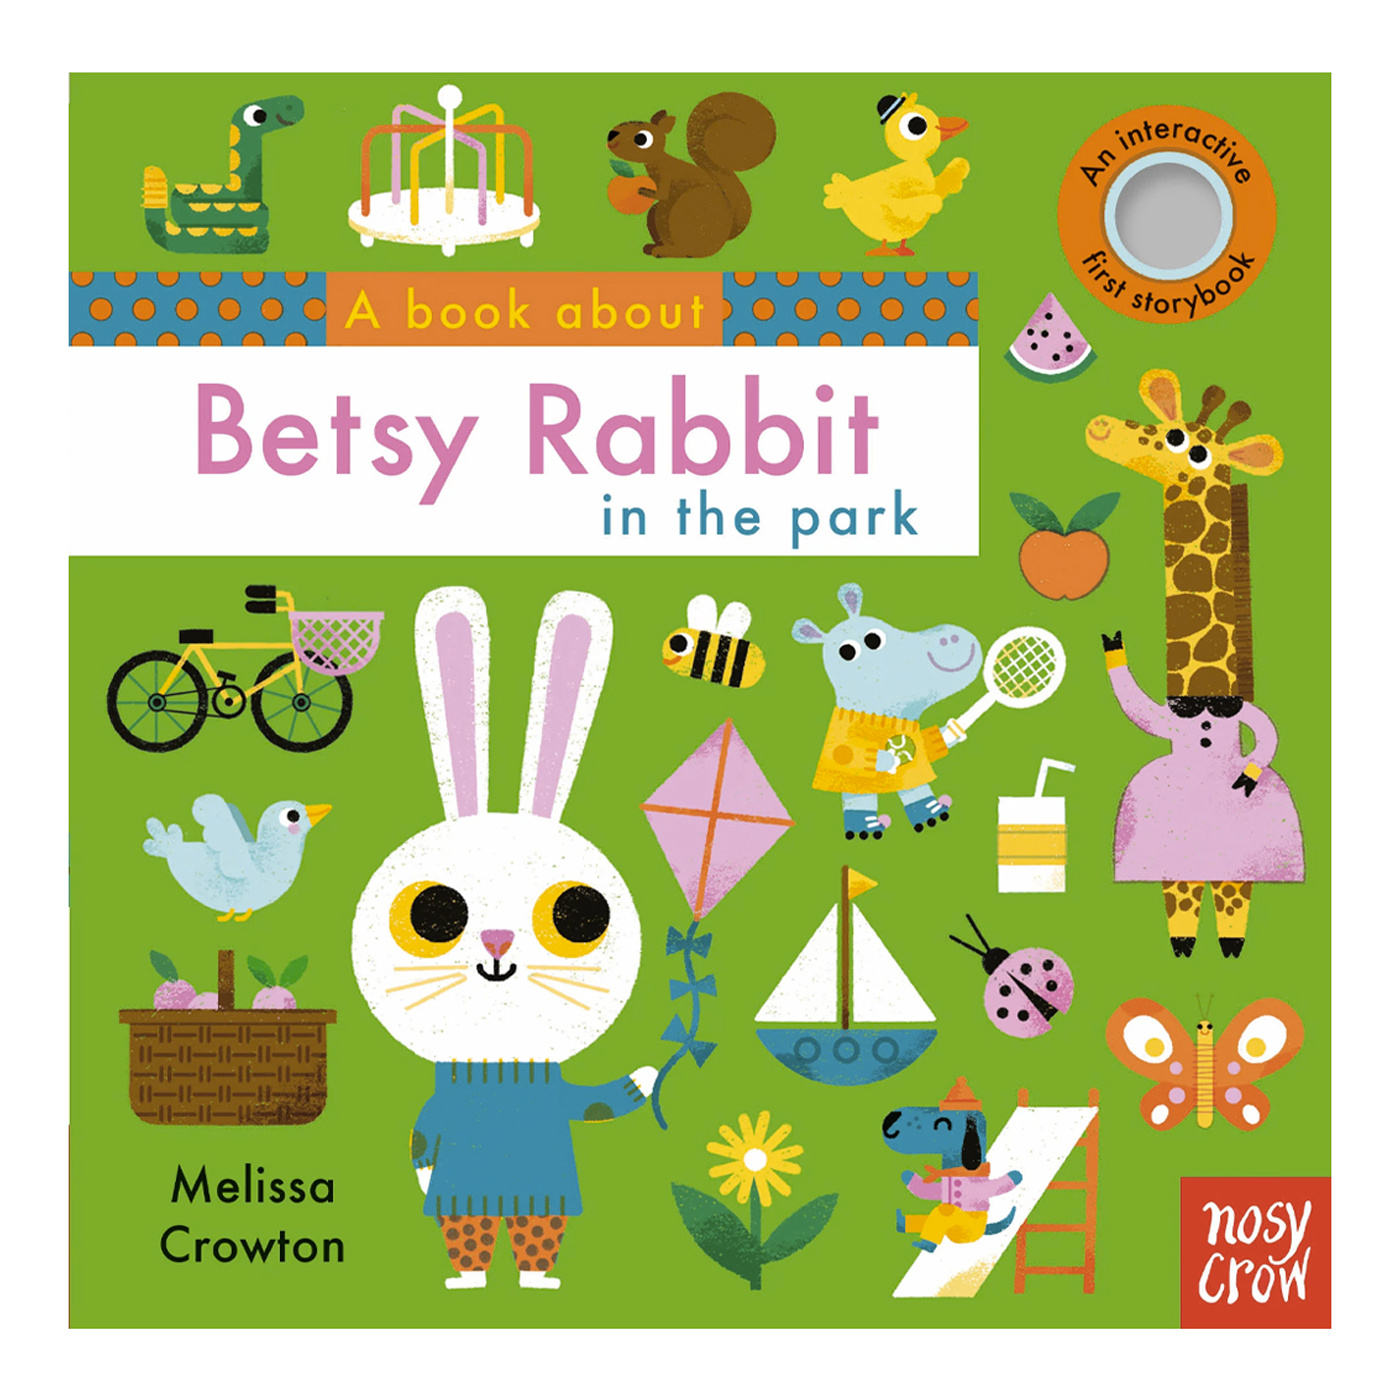  A book about Betsy Rabbit in the park